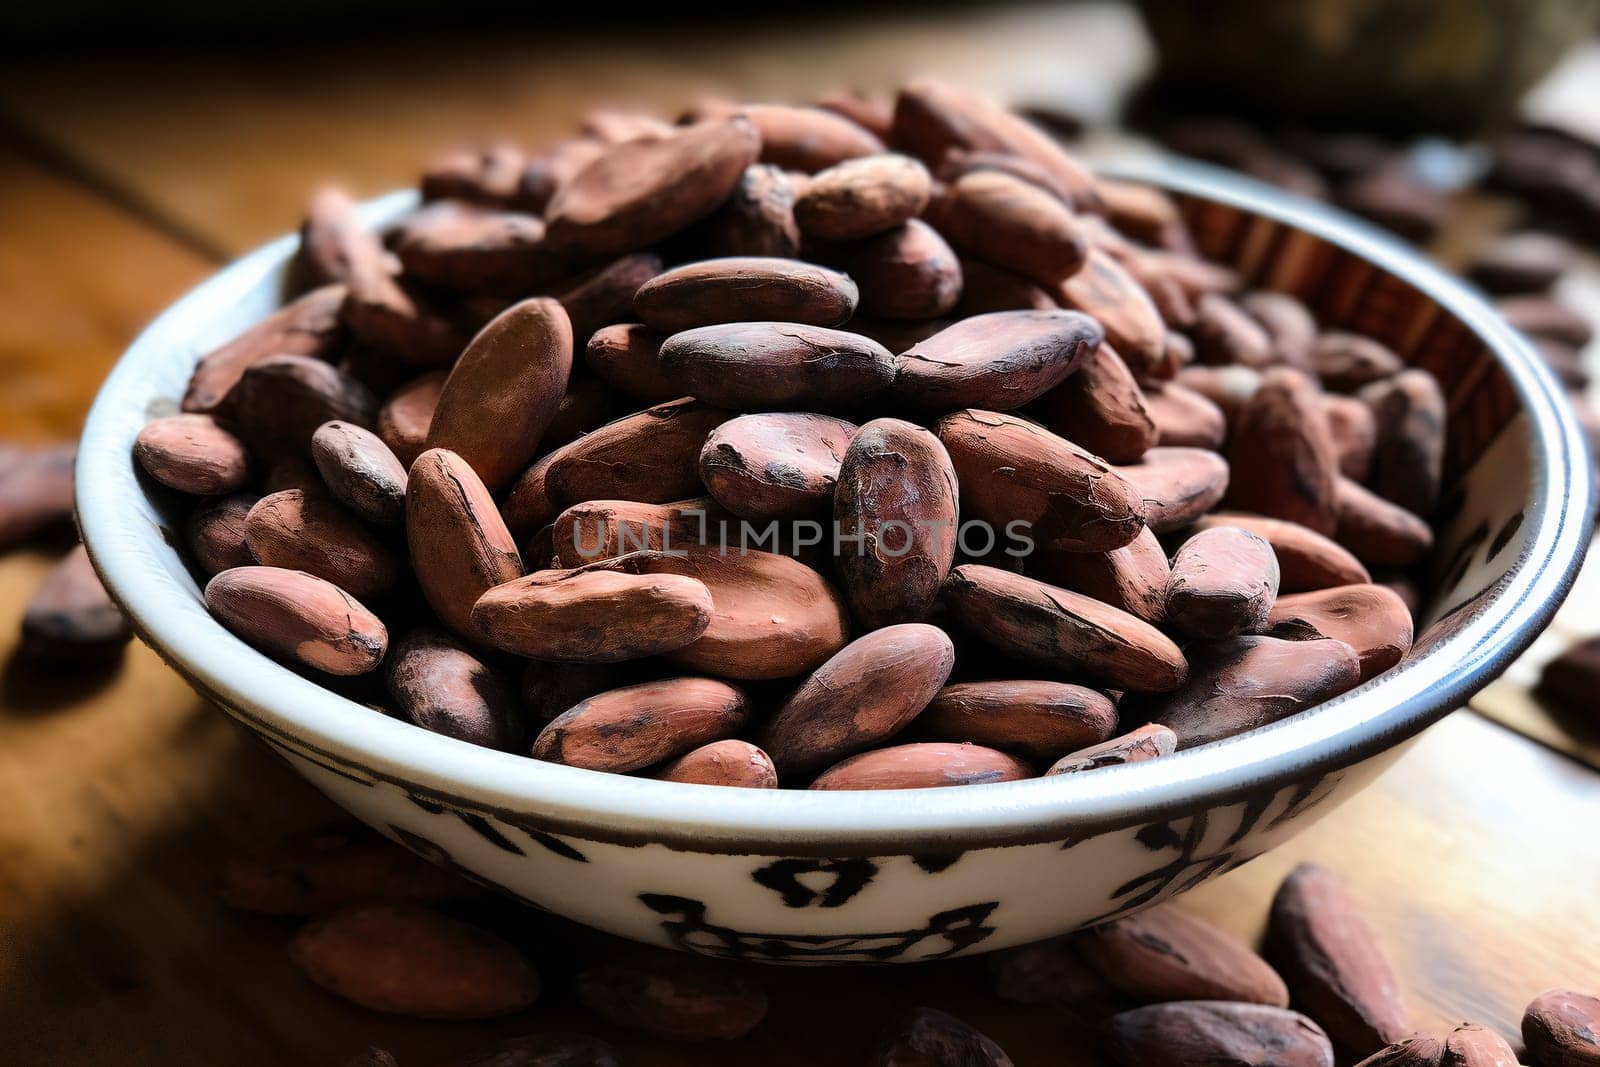 Concept of fresh and aromatic food cacao beans